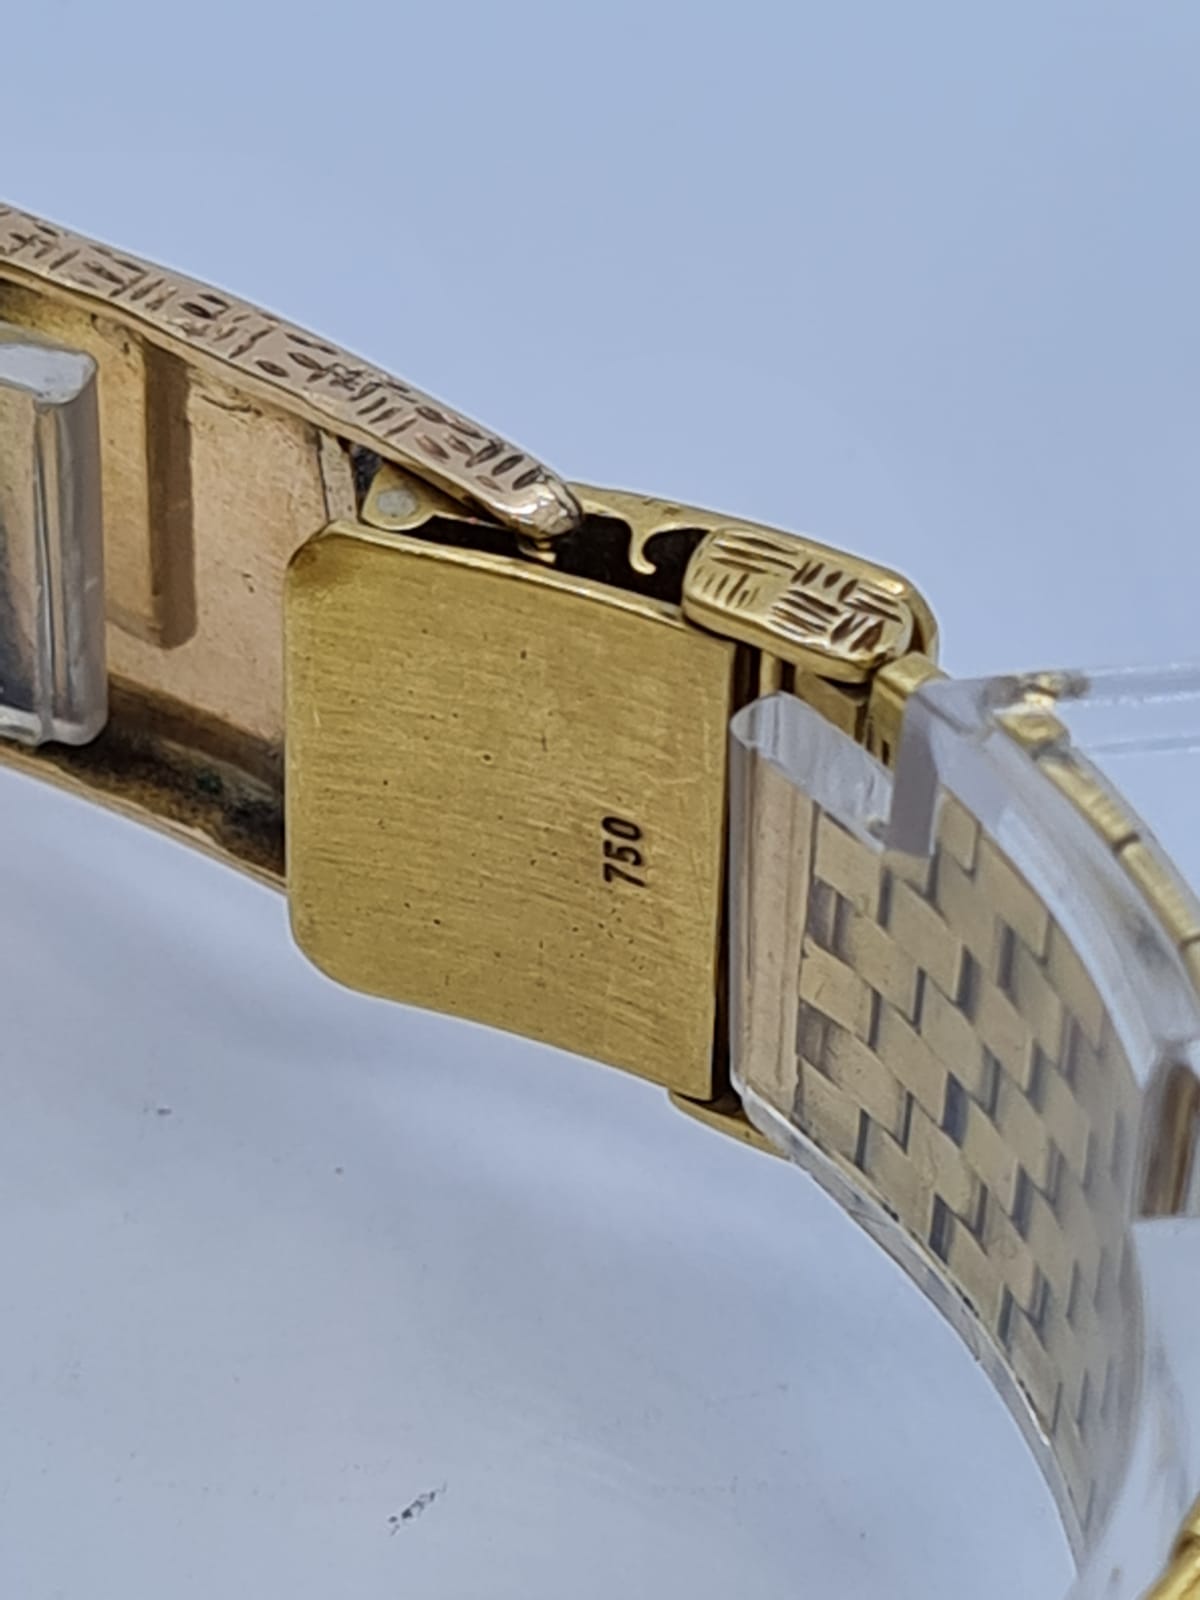 PATEK PHILIPPE GENEVE gent watch with blue face and 18k gold strap,36mm case 1970s model - Image 13 of 17